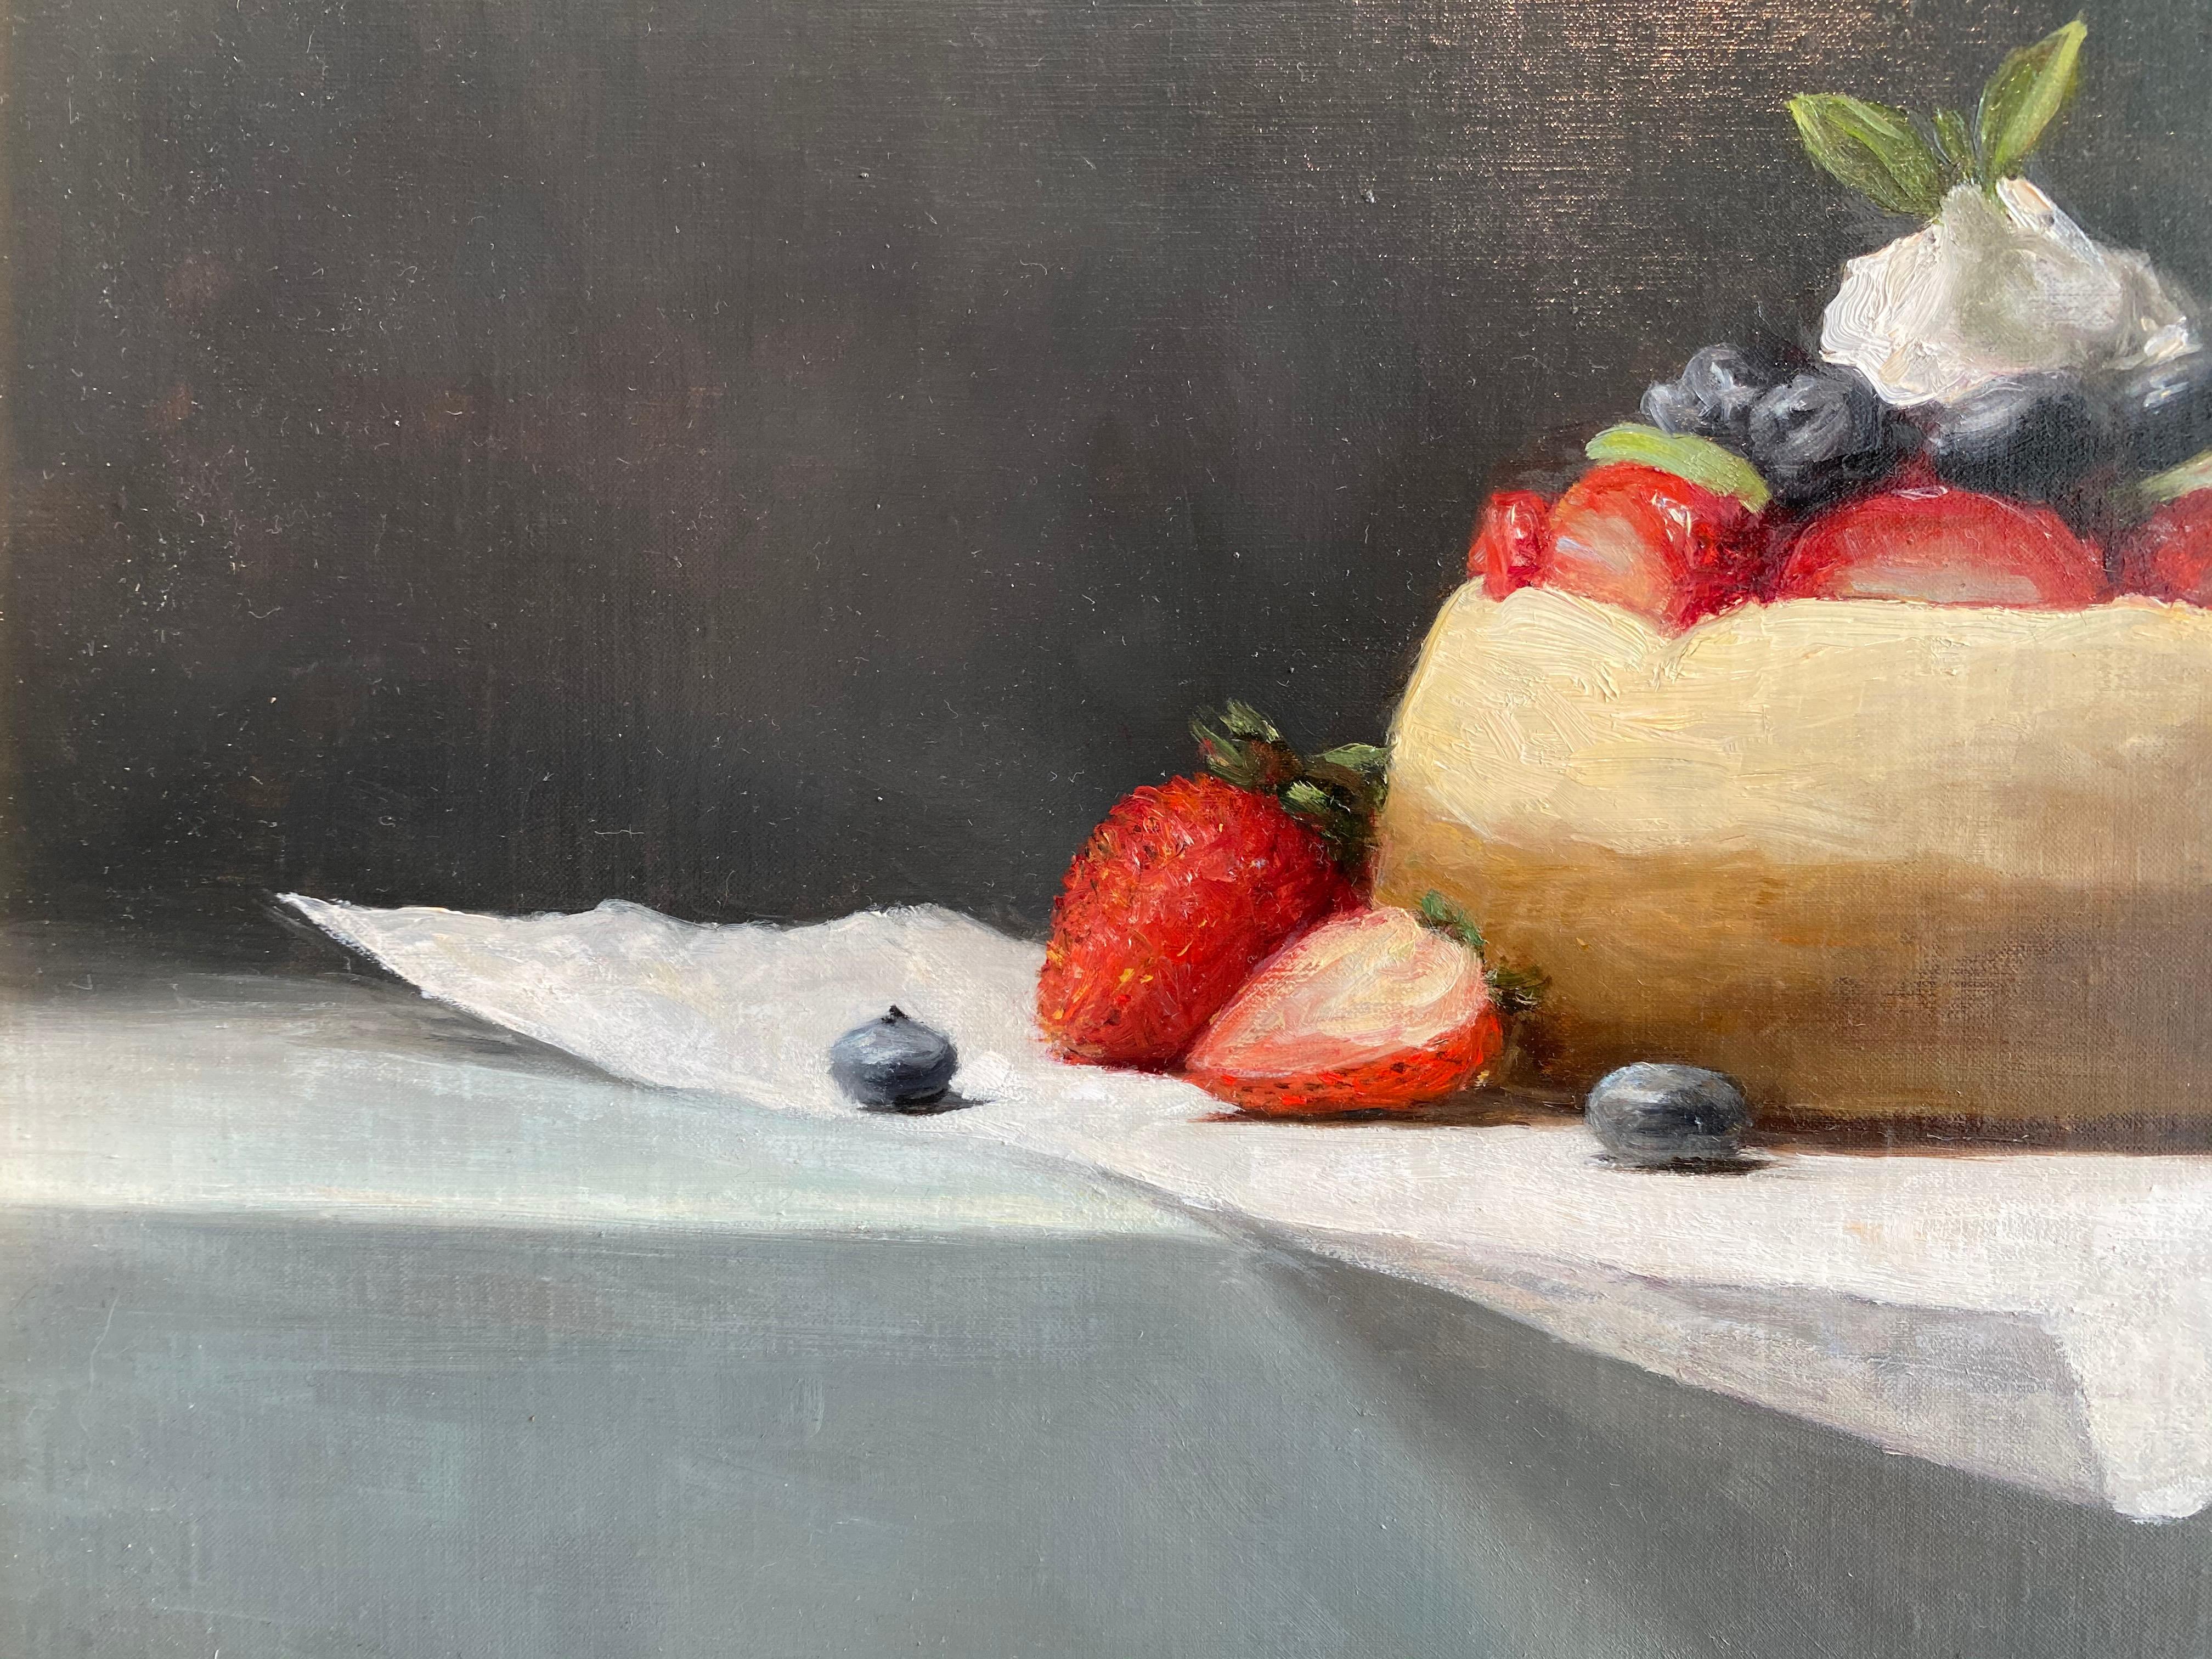 A Still life painting of a small cheesecake, adorned with strawberries, blueberries, and cream. Placed upon a layer of parchment paper, against a grey backdrop.  Sarah Lamb is known for her poetic still lifes that utilize classical painting